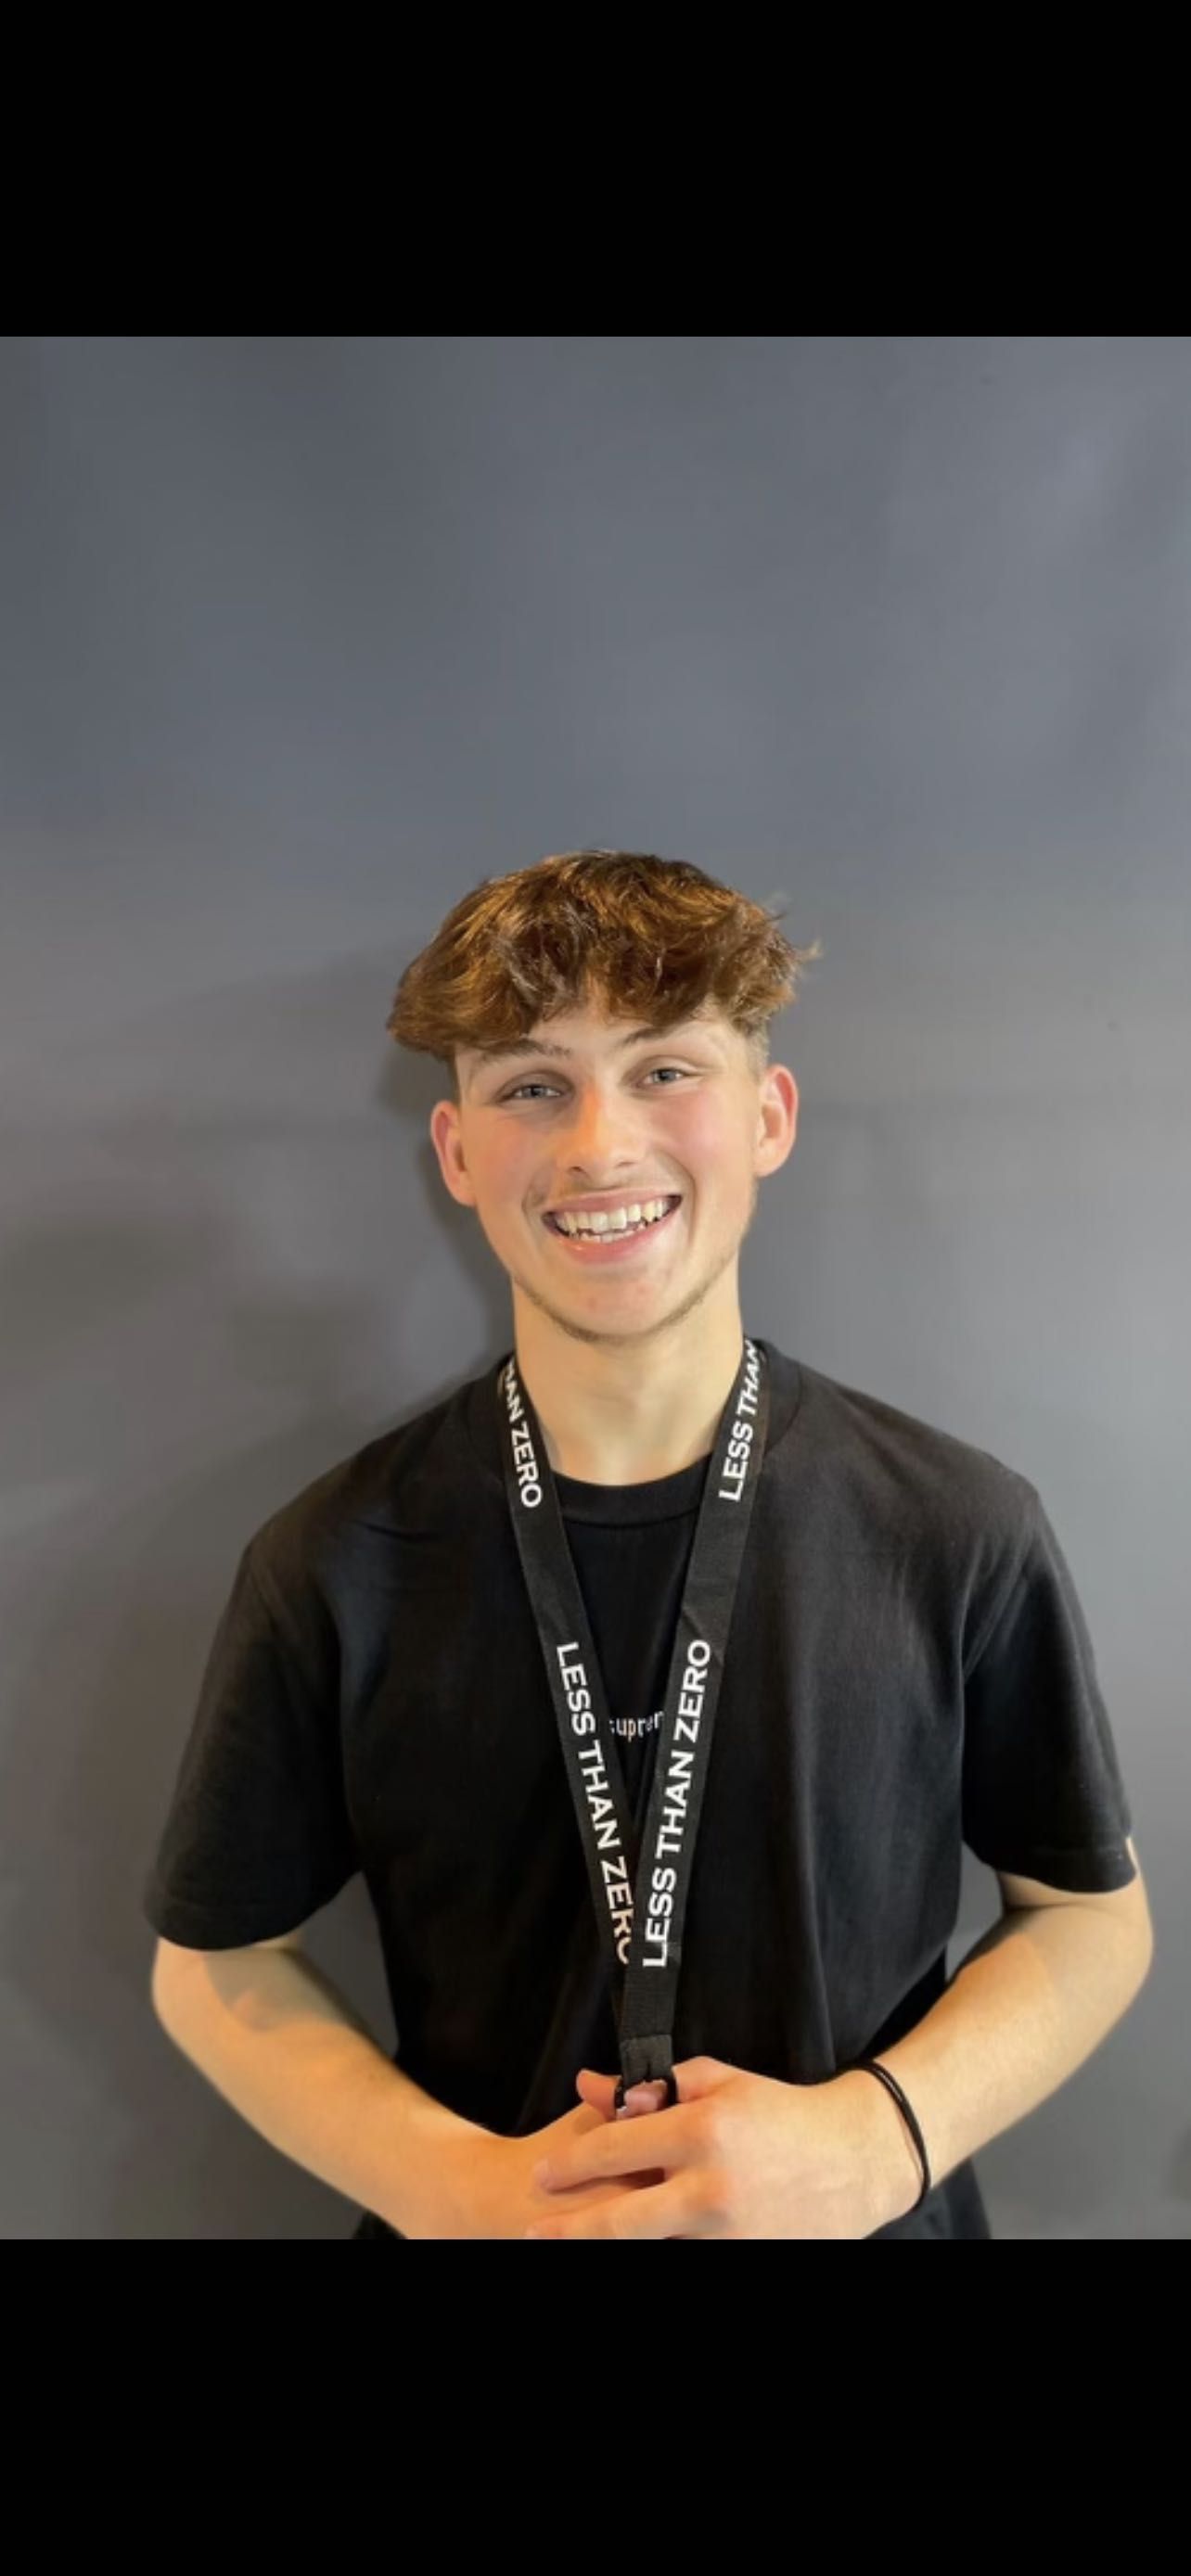 James - Qualified Barber - LESS THAN ZERO - Chesterfield